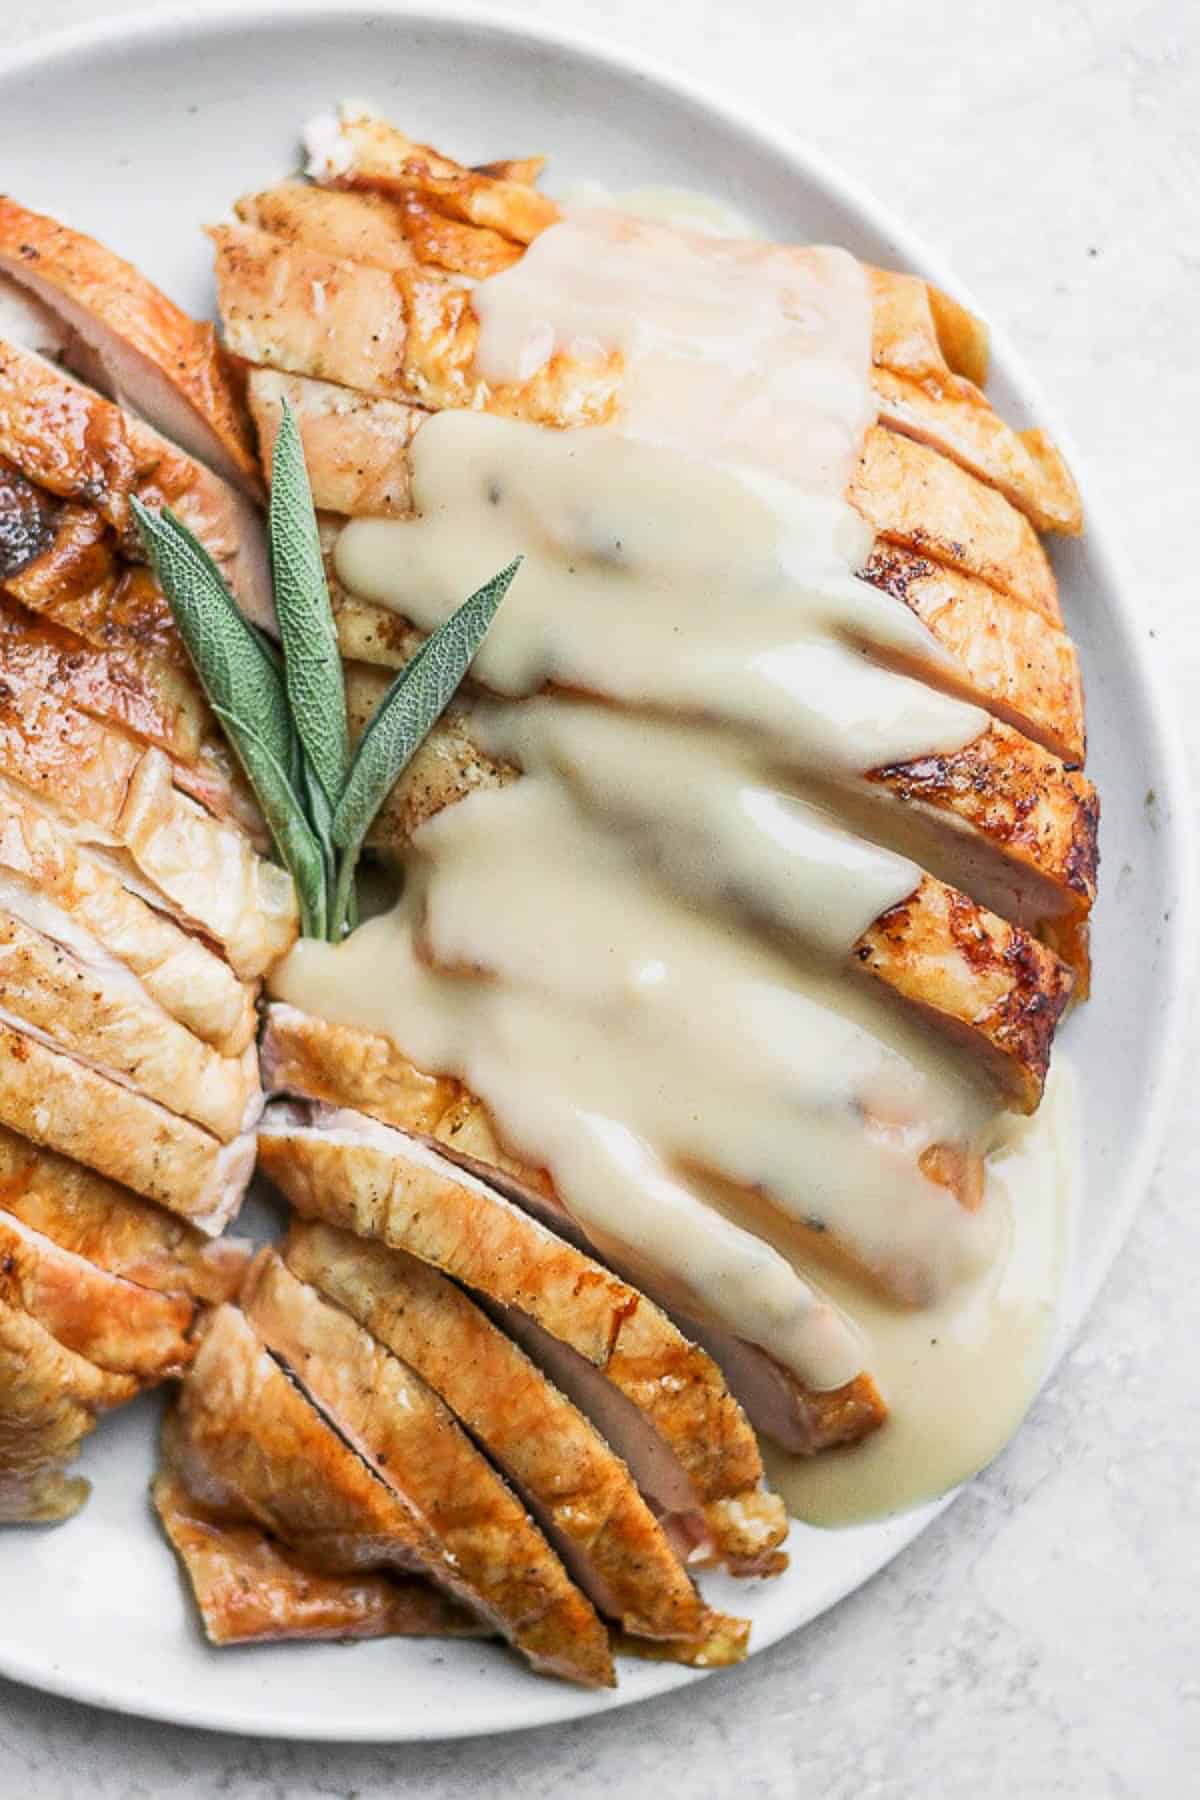 A plate of sliced turkey breast covered in turkey gravy and garnished with fresh sage leaves.